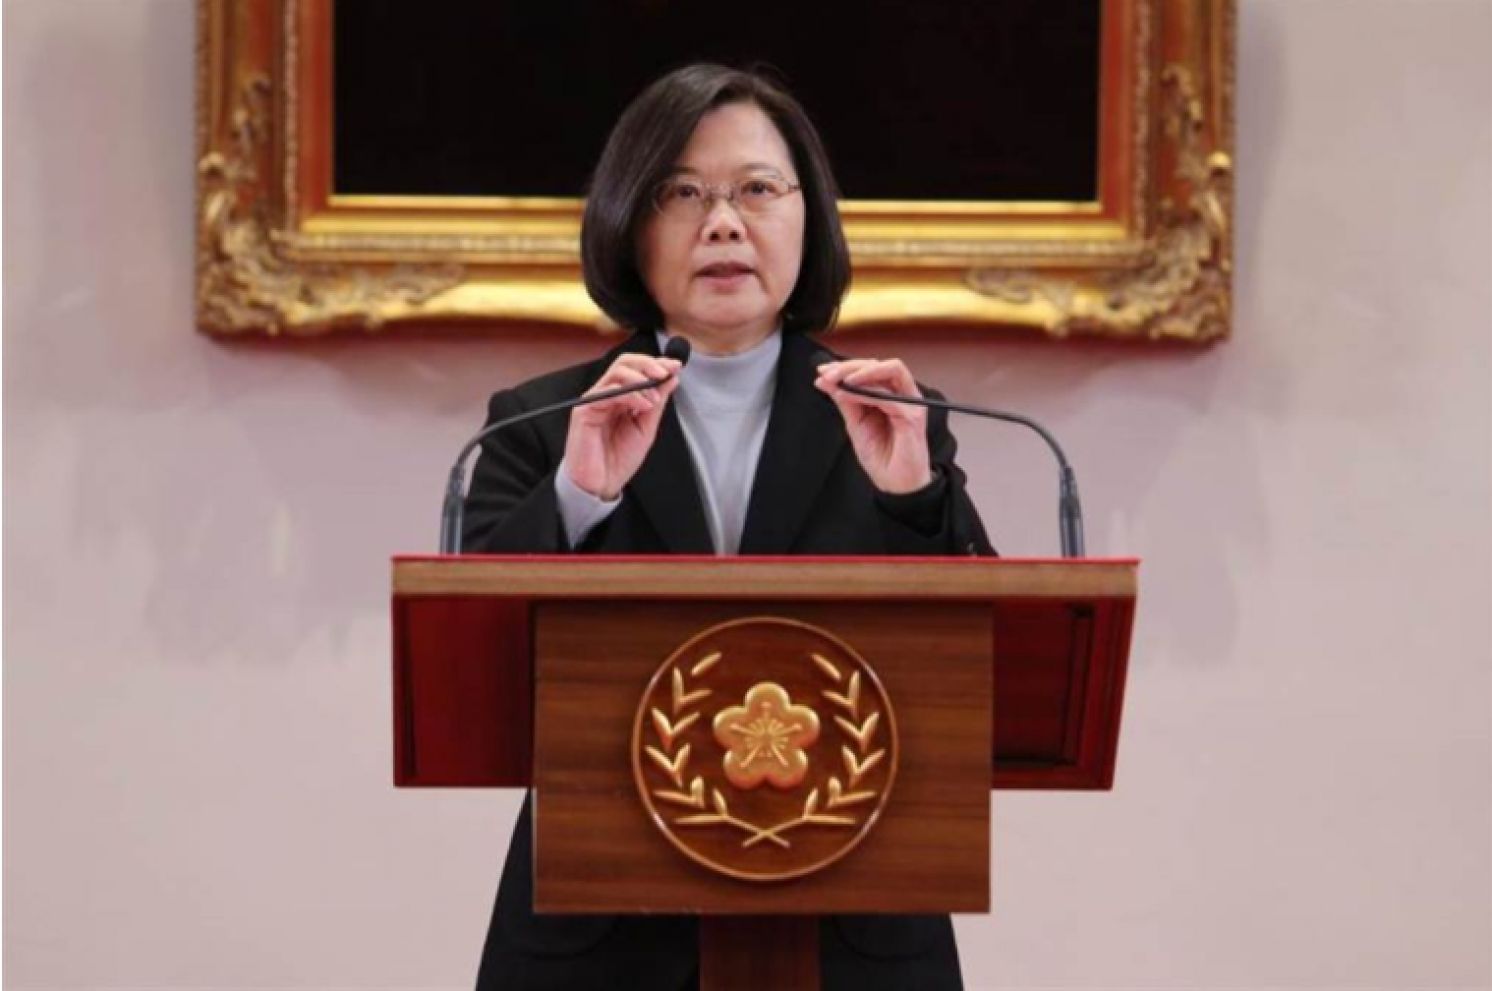 Amid New Biden Administration, Continued Tensions, President Tsai Calls for Cross-Strait Dialogue in New Year Address